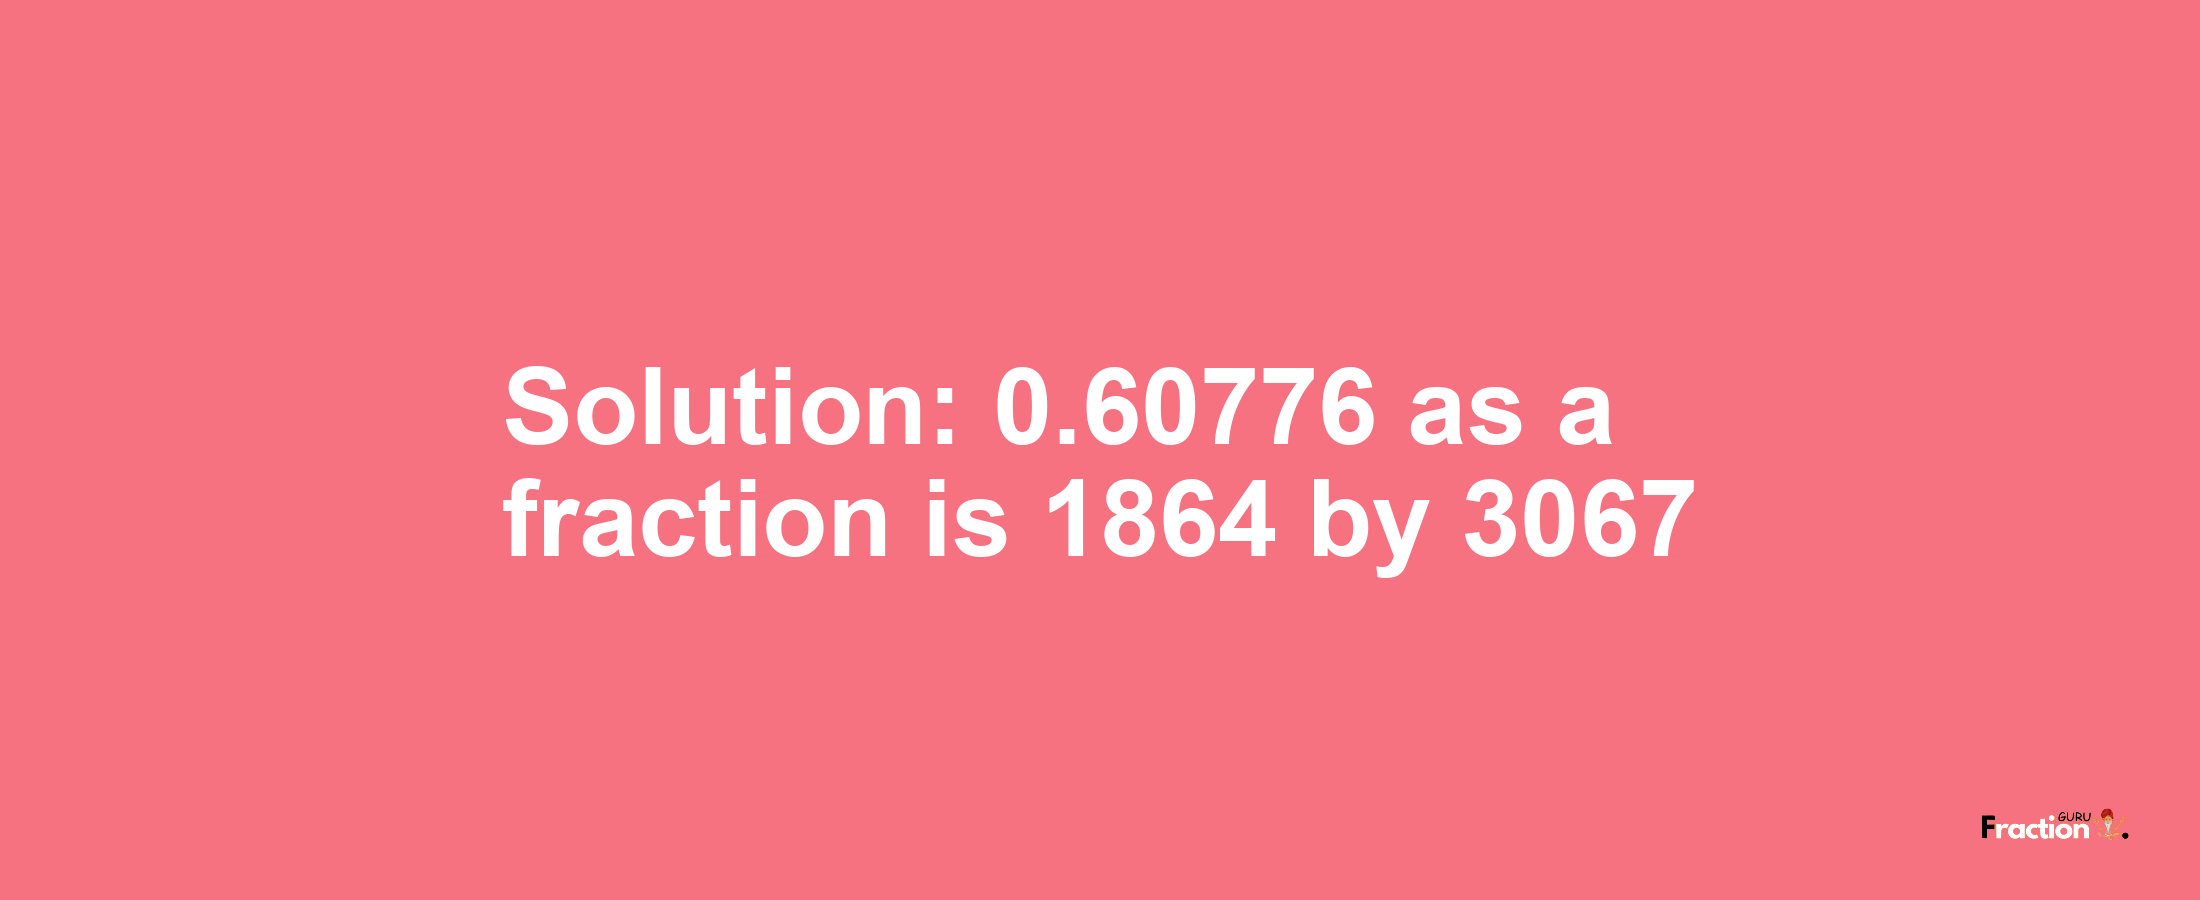 Solution:0.60776 as a fraction is 1864/3067